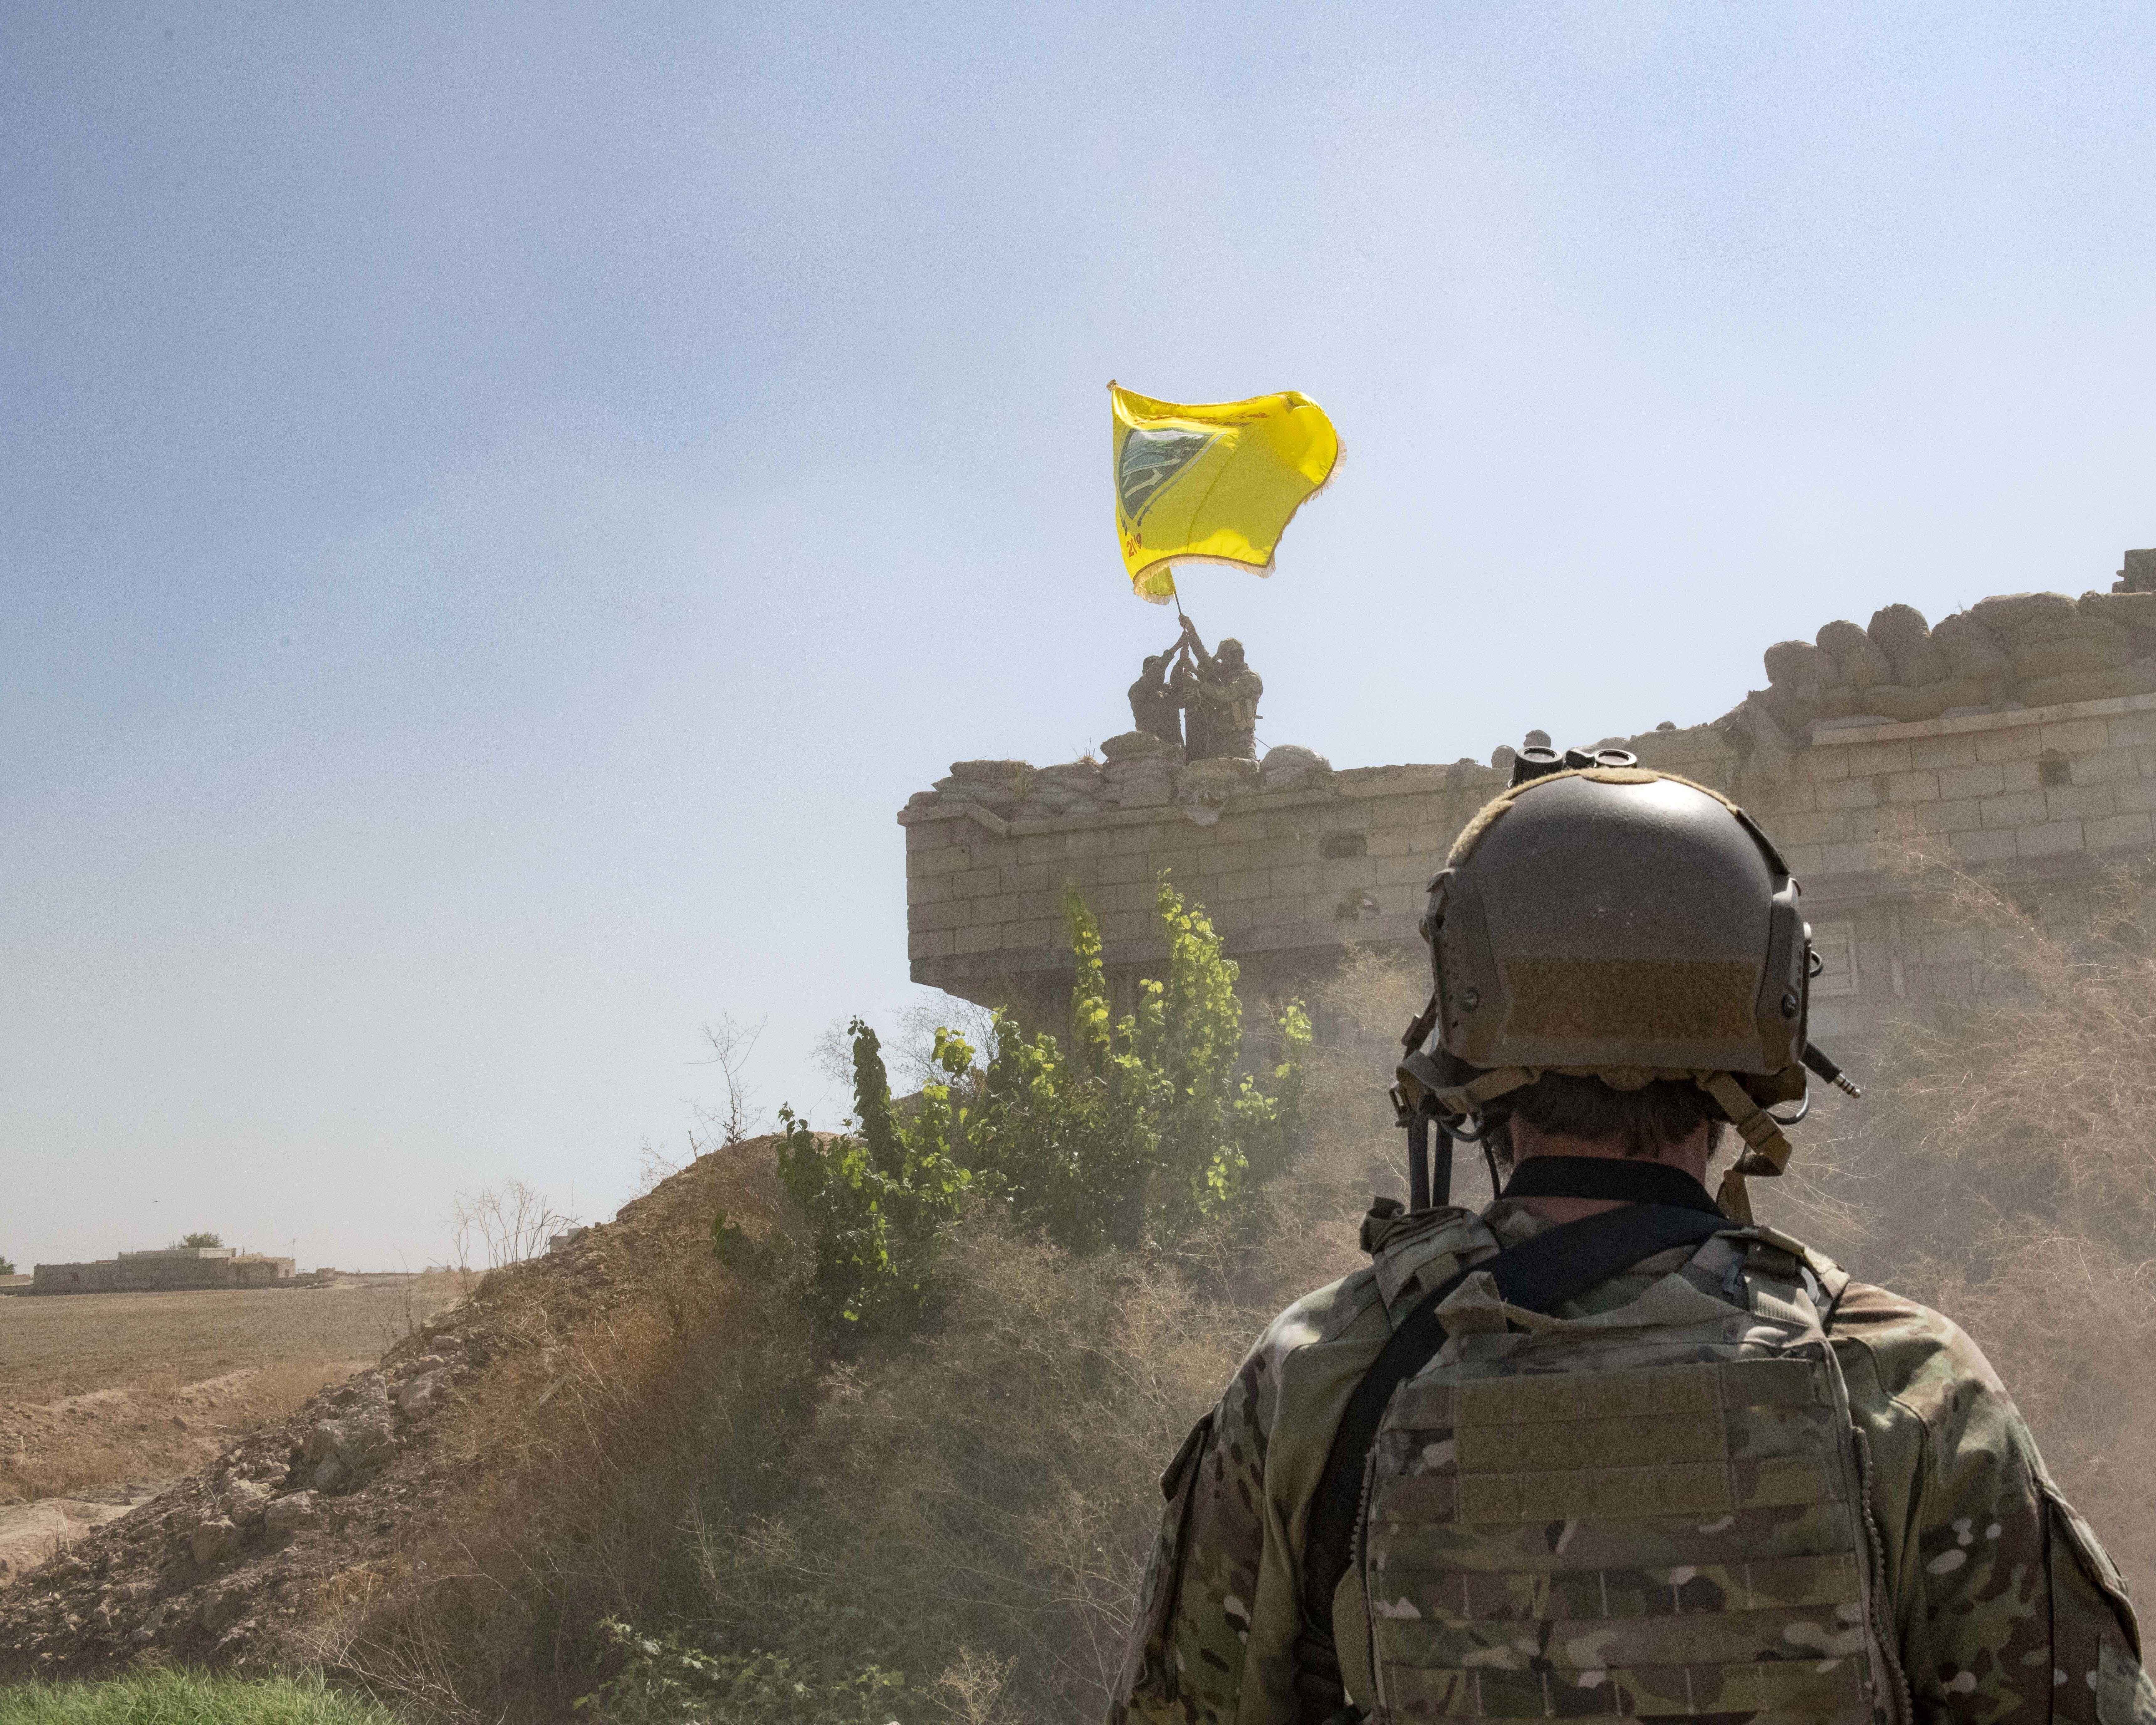 In this Sept. 21, 2019, photo, released by the U.S. Army, a U.S. soldier oversees members of the Syrian Democratic Forces as they demolish a Kurdish fighters' fortification and raise a Tal Abyad Military Council flag over the outpost as part of the so-called 